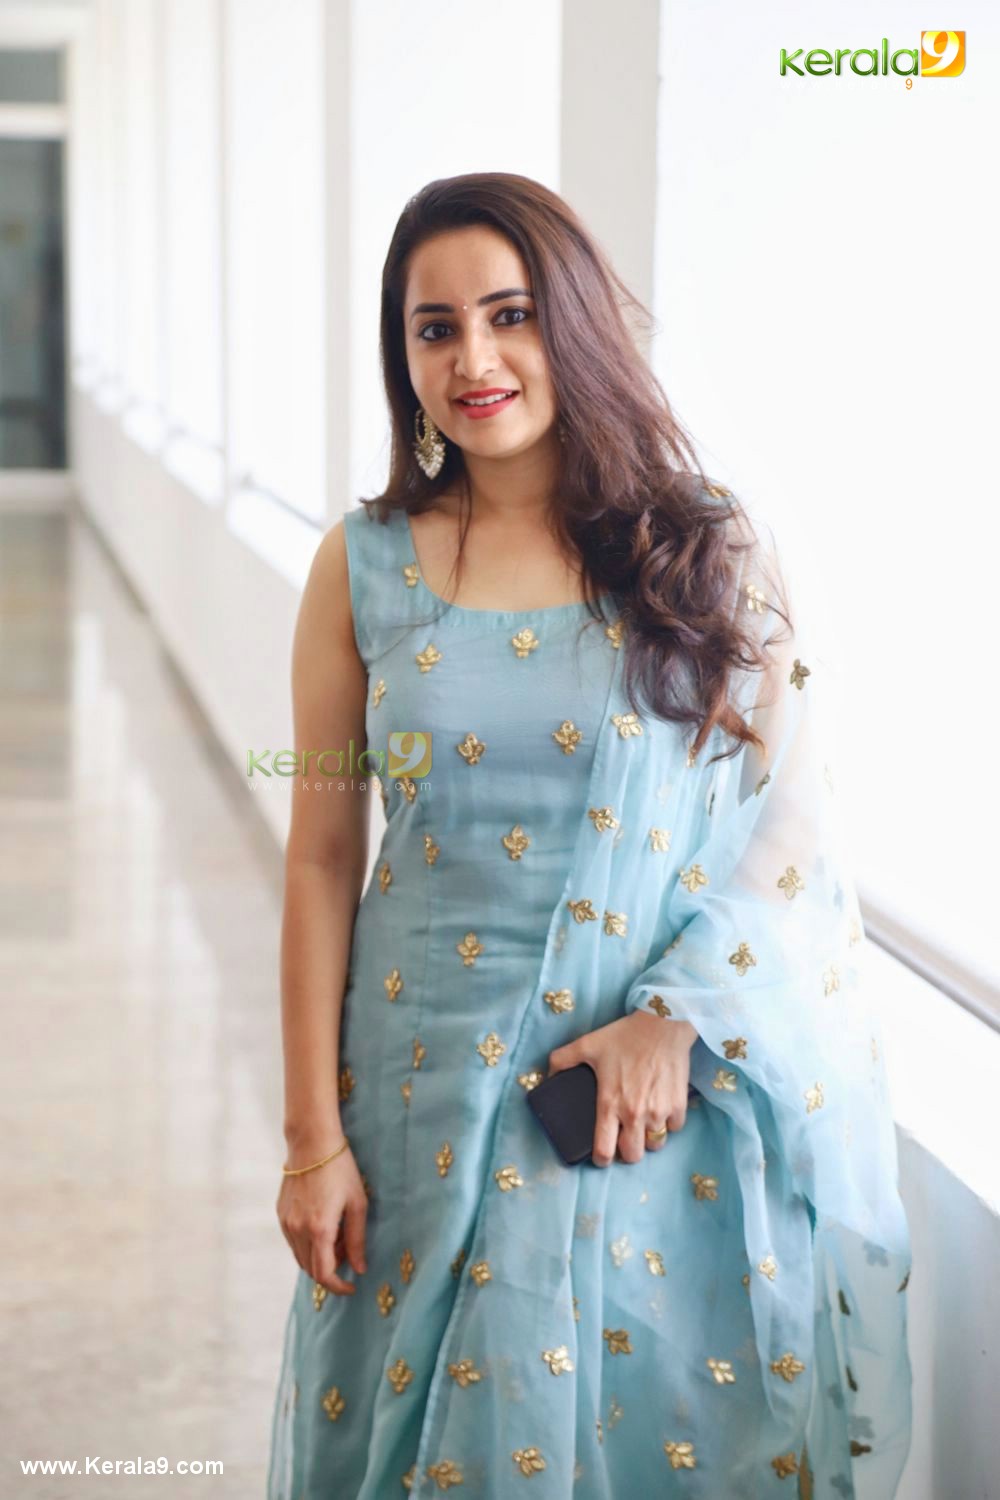 Bhama Photos, Pictures And Bhama HD Images - Kerala9.com